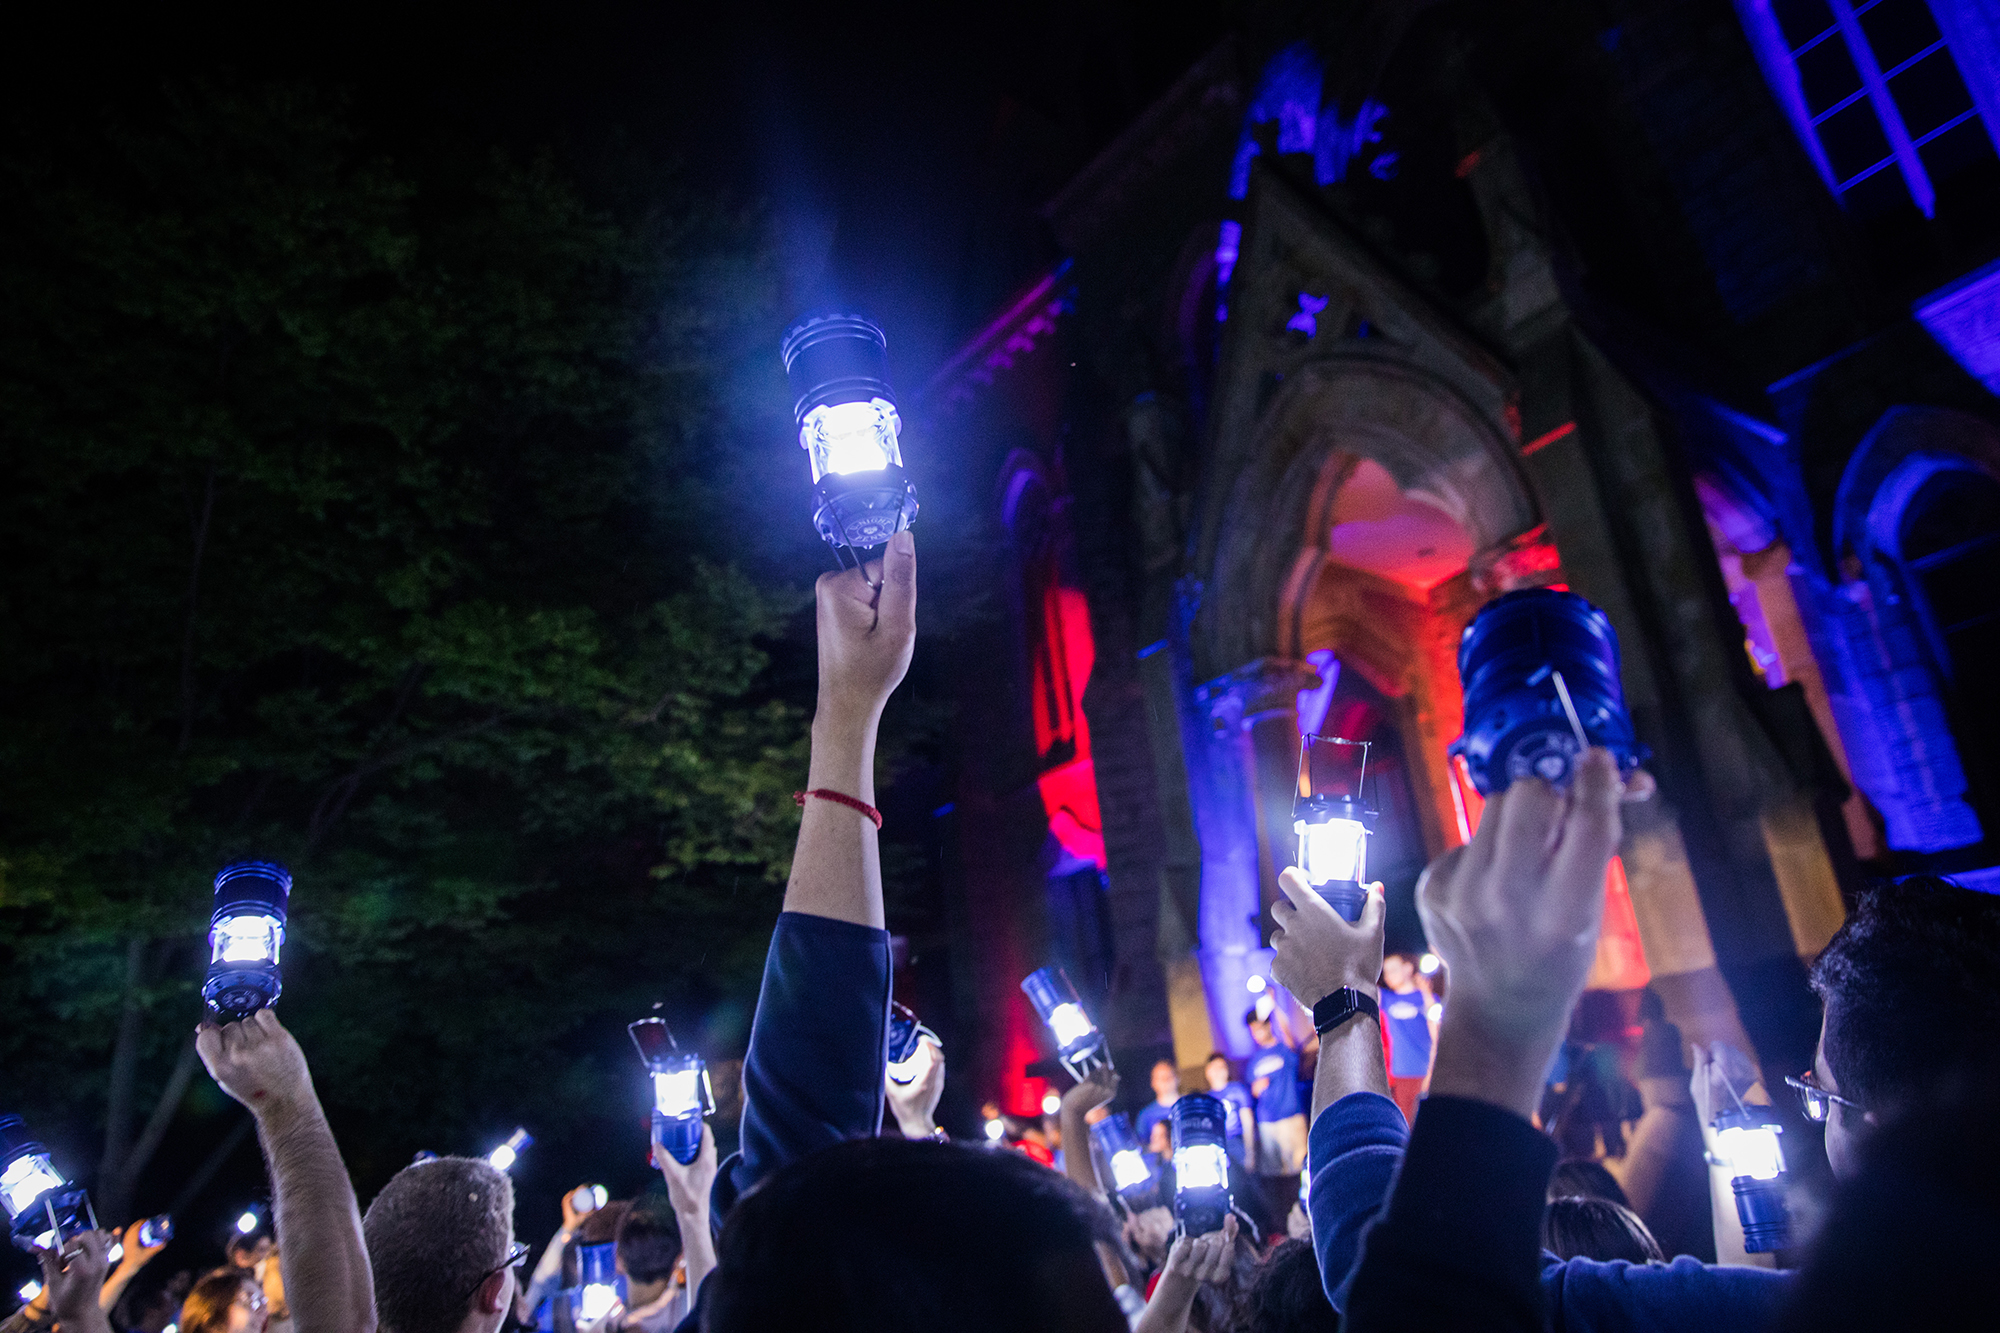 The crowd of students hold lanterns aloft in the night sky in front of College Hall.